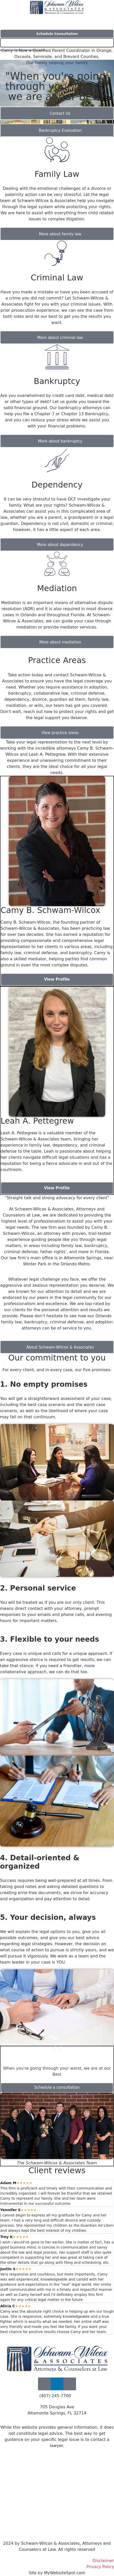 Schwam-Wilcox & Associates, Attorneys and Counselors at Law - Orlando FL Lawyers